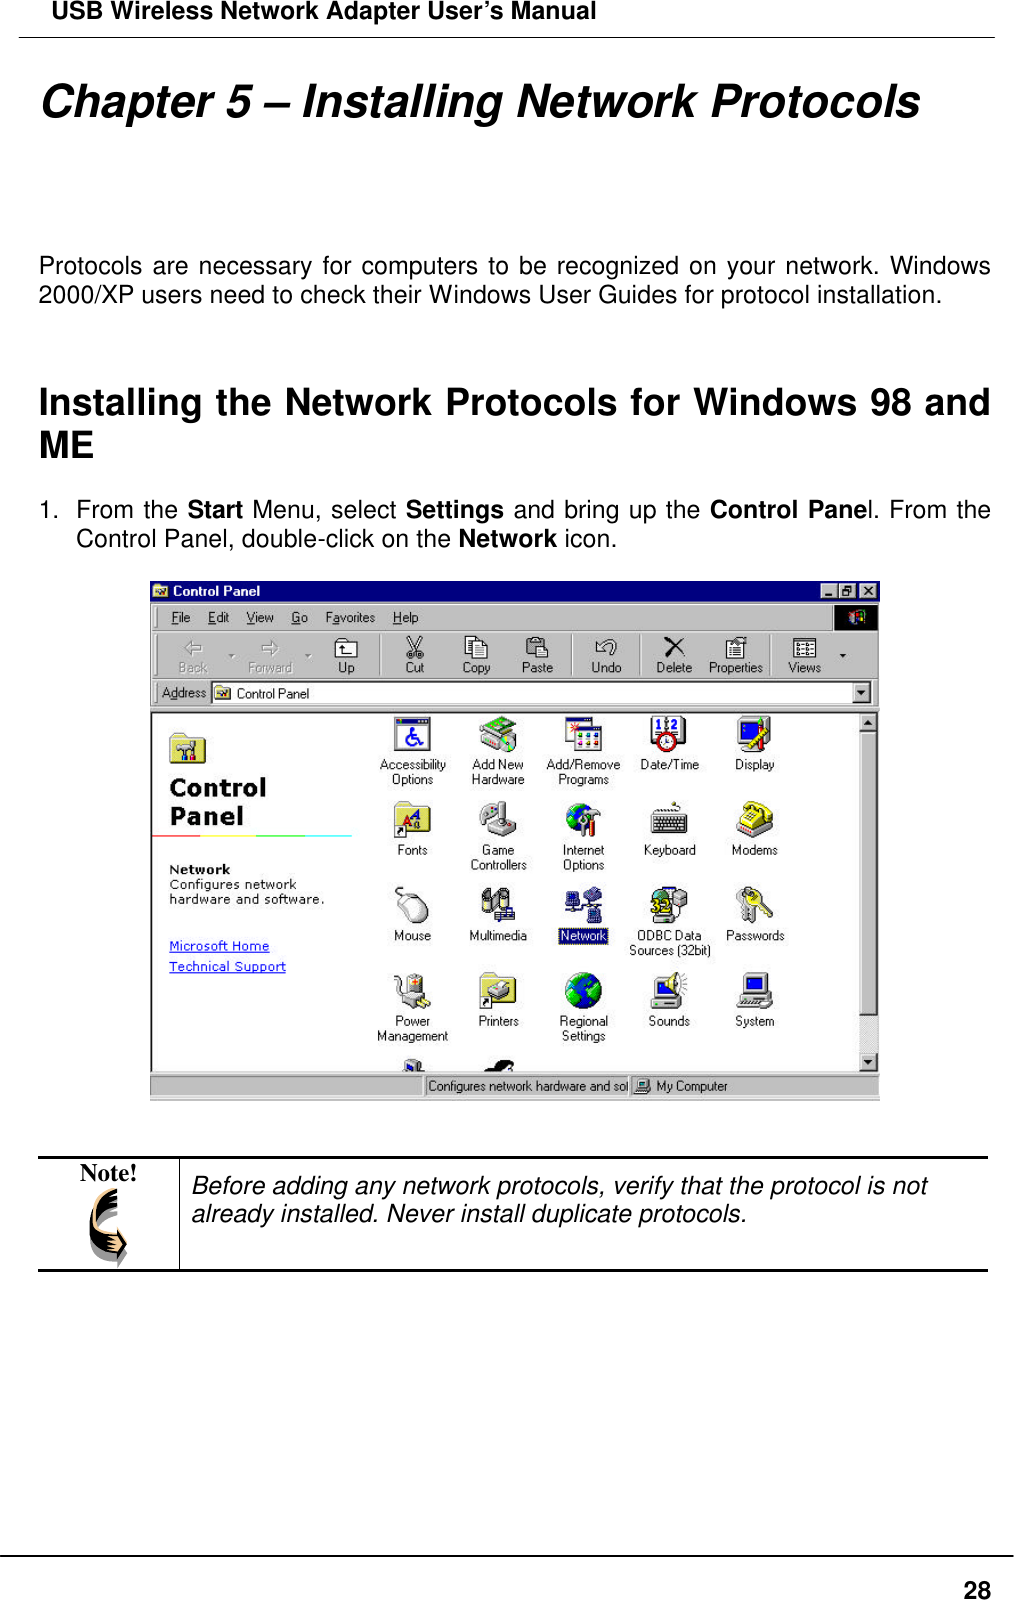  USB Wireless Network Adapter User’s Manual  28Chapter 5 – Installing Network Protocols Protocols are necessary for computers to be recognized on your network. Windows 2000/XP users need to check their Windows User Guides for protocol installation.   Installing the Network Protocols for Windows 98 and ME  1. From the Start Menu, select Settings and bring up the Control Panel. From the Control Panel, double-click on the Network icon.     Note!  Before adding any network protocols, verify that the protocol is not already installed. Never install duplicate protocols.         